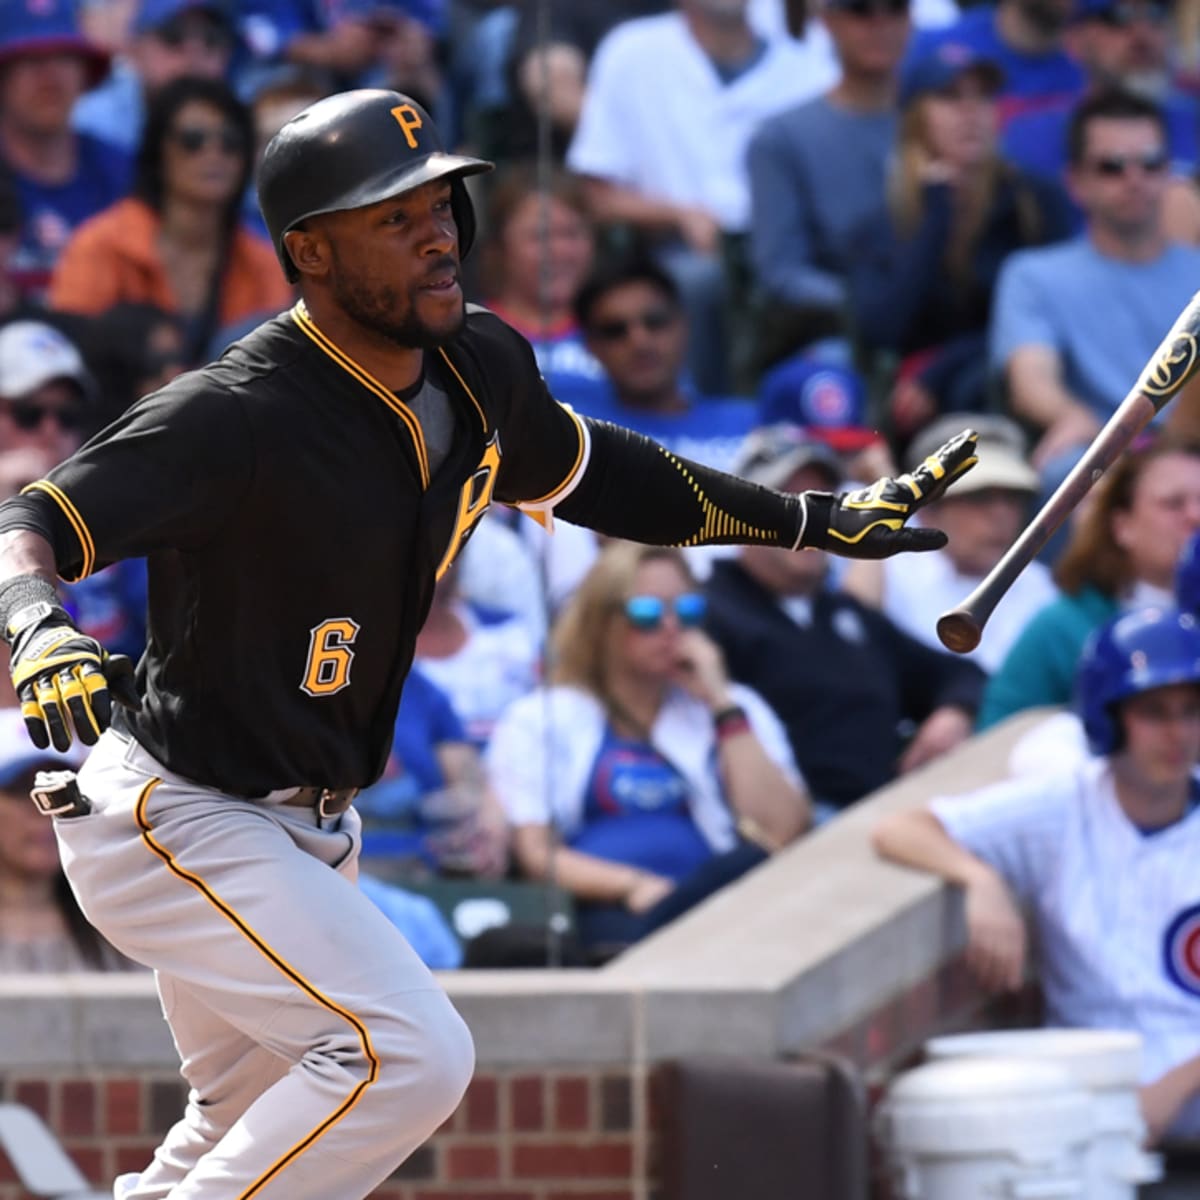 Pirates cancel Starling Marte jersey giveaway after PED suspension